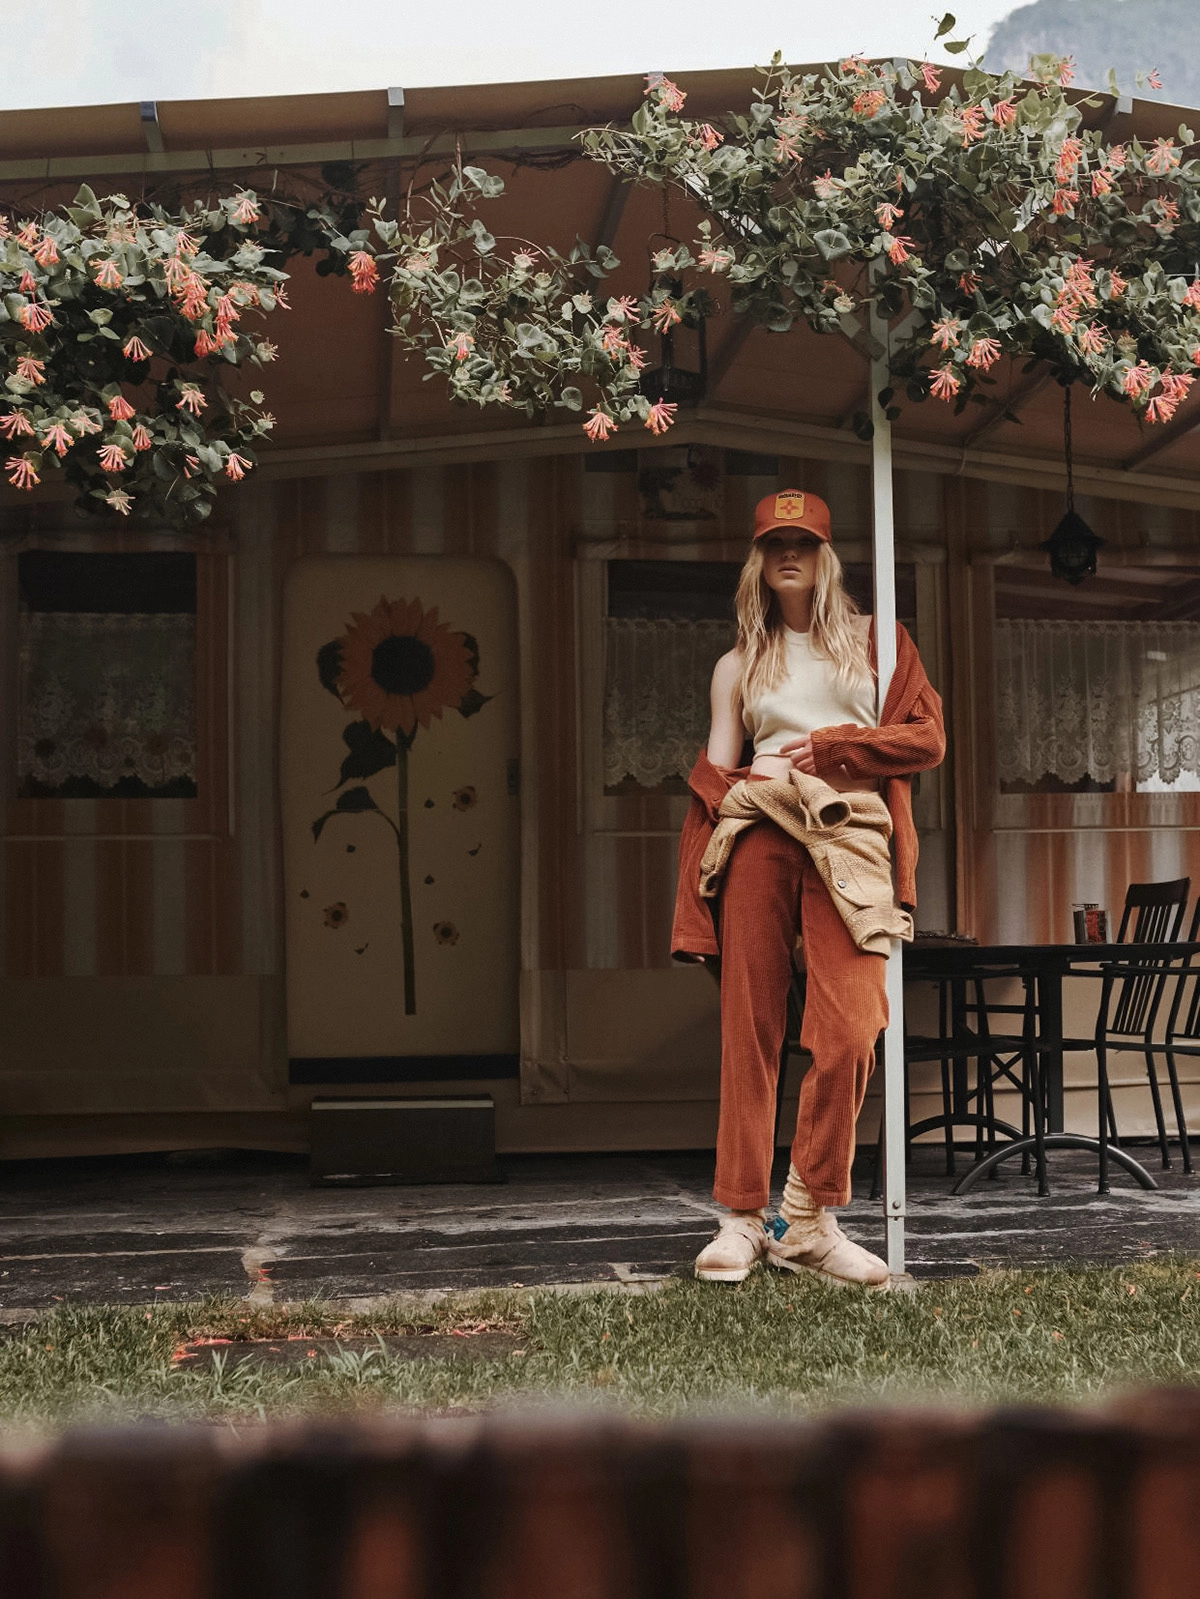 Tes Linnenkoper by Alessio Albi for Elle Italia September 22nd, 2022